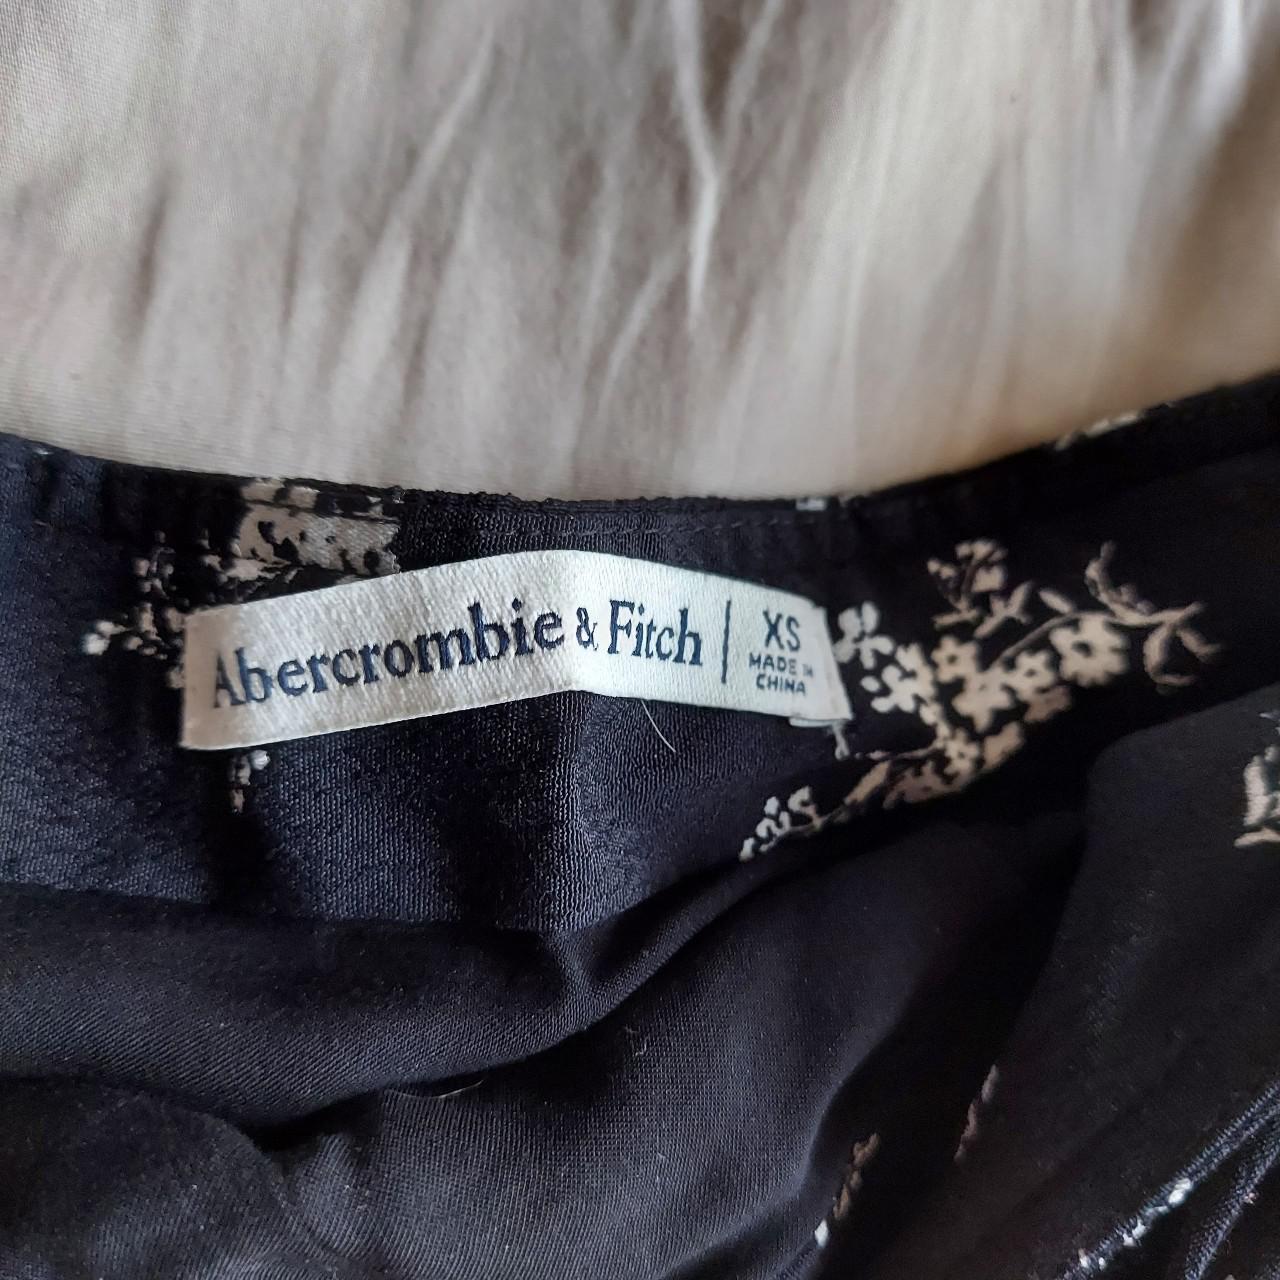 Abercrombie & Fitch Women's Black and White Skirt (4)